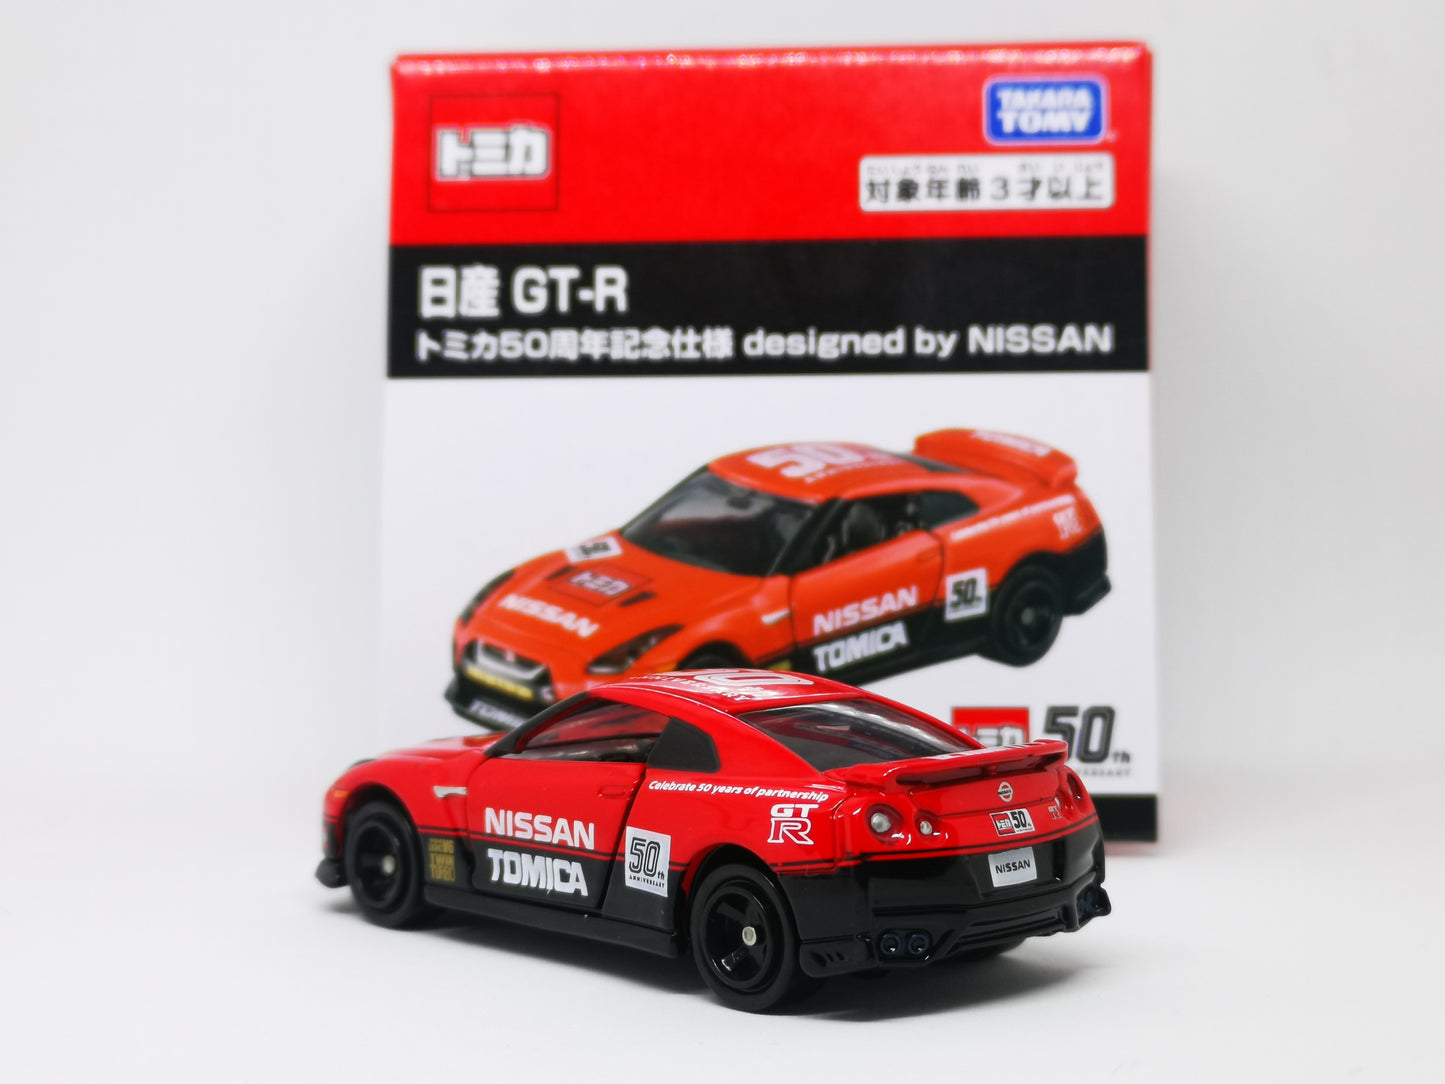 Tomica 50th Anniversary Nissan GT-R